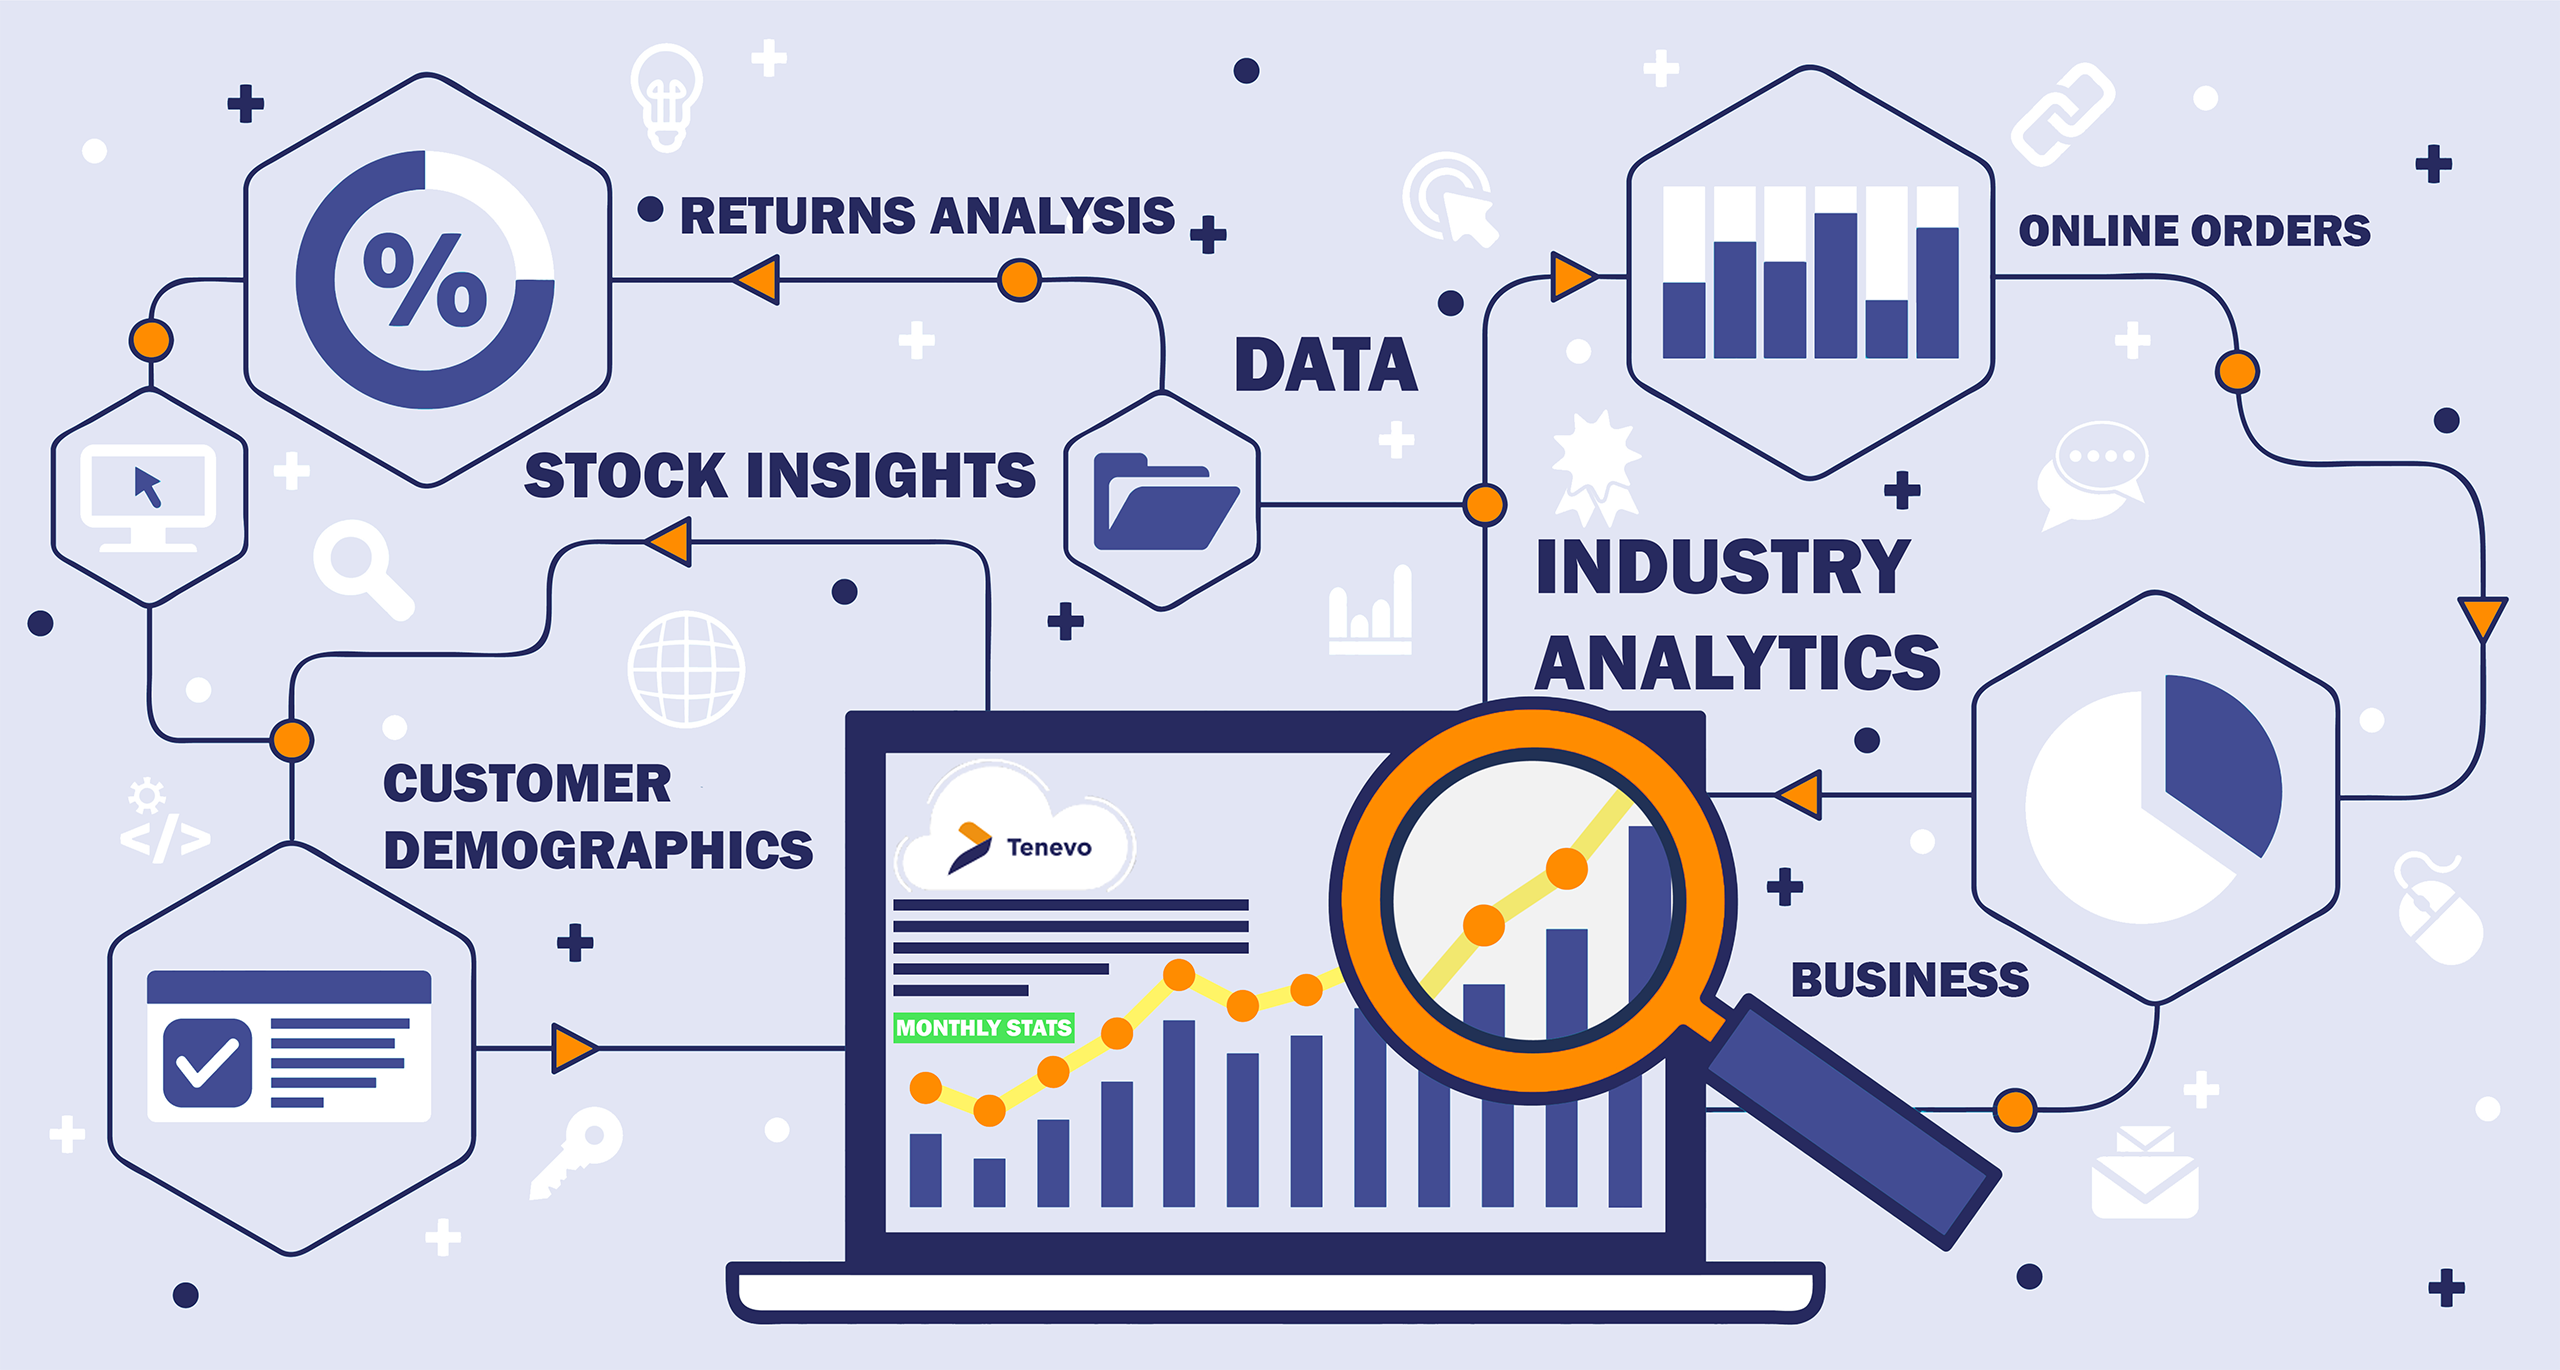 Experience and industry analysis, business data, and insights.